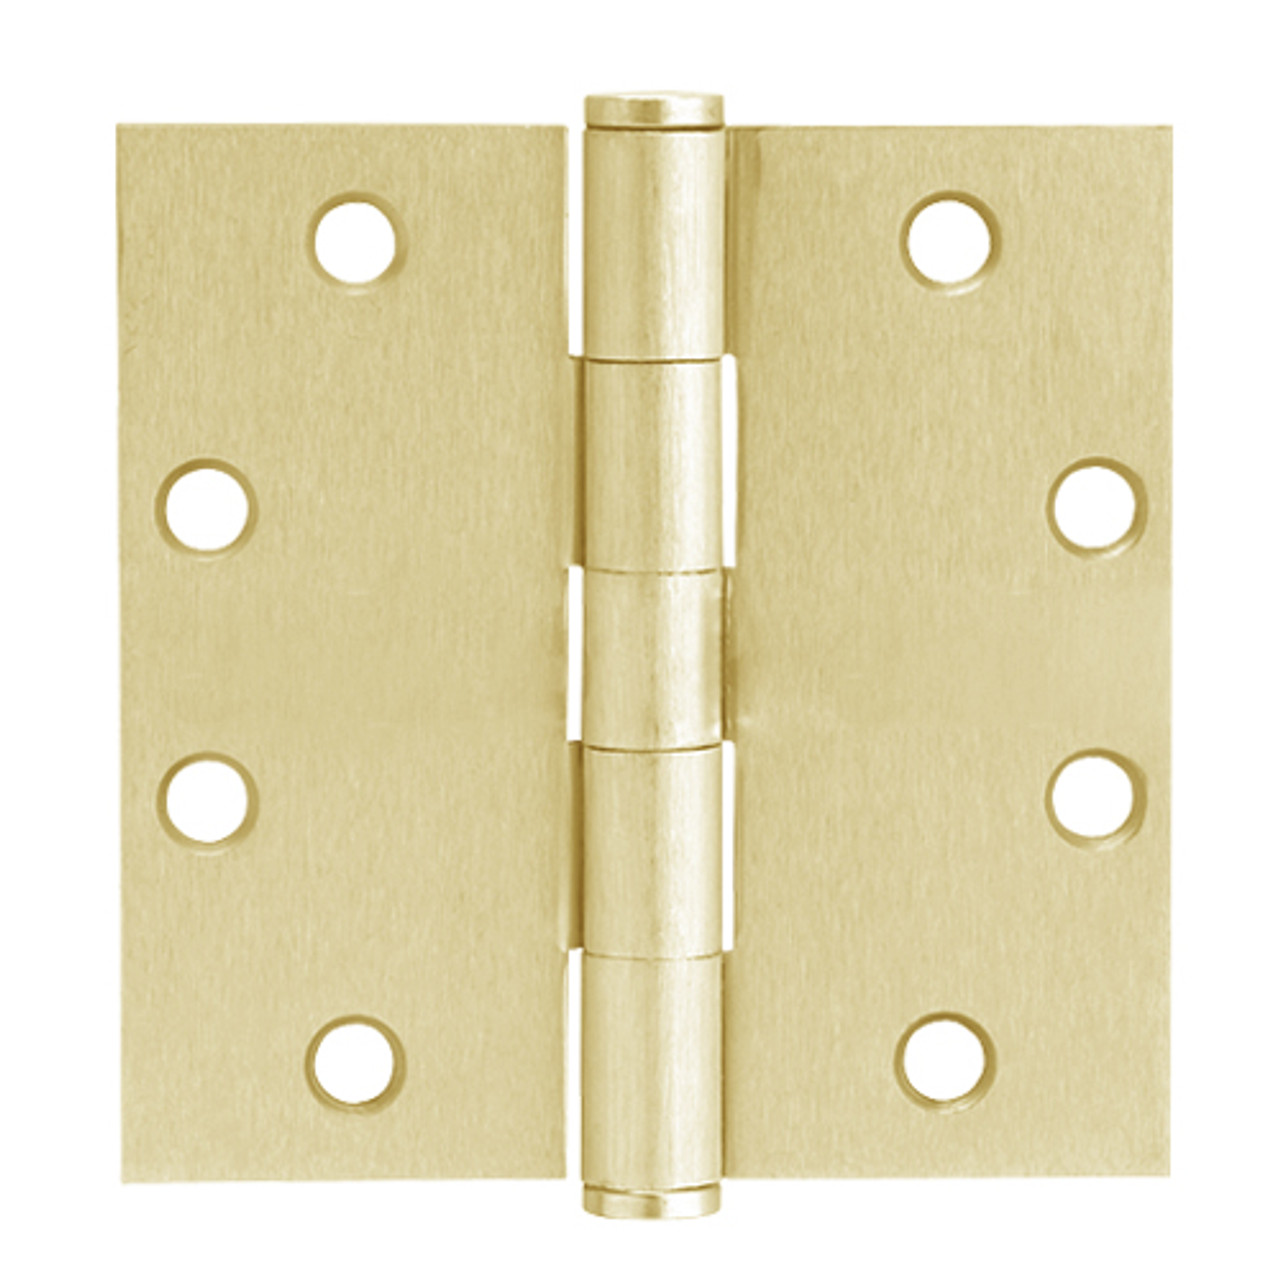 5PB1-5x4-5-633 IVES 5 Knuckle Plain Bearing Full Mortise Hinge in Satin Brass Plated